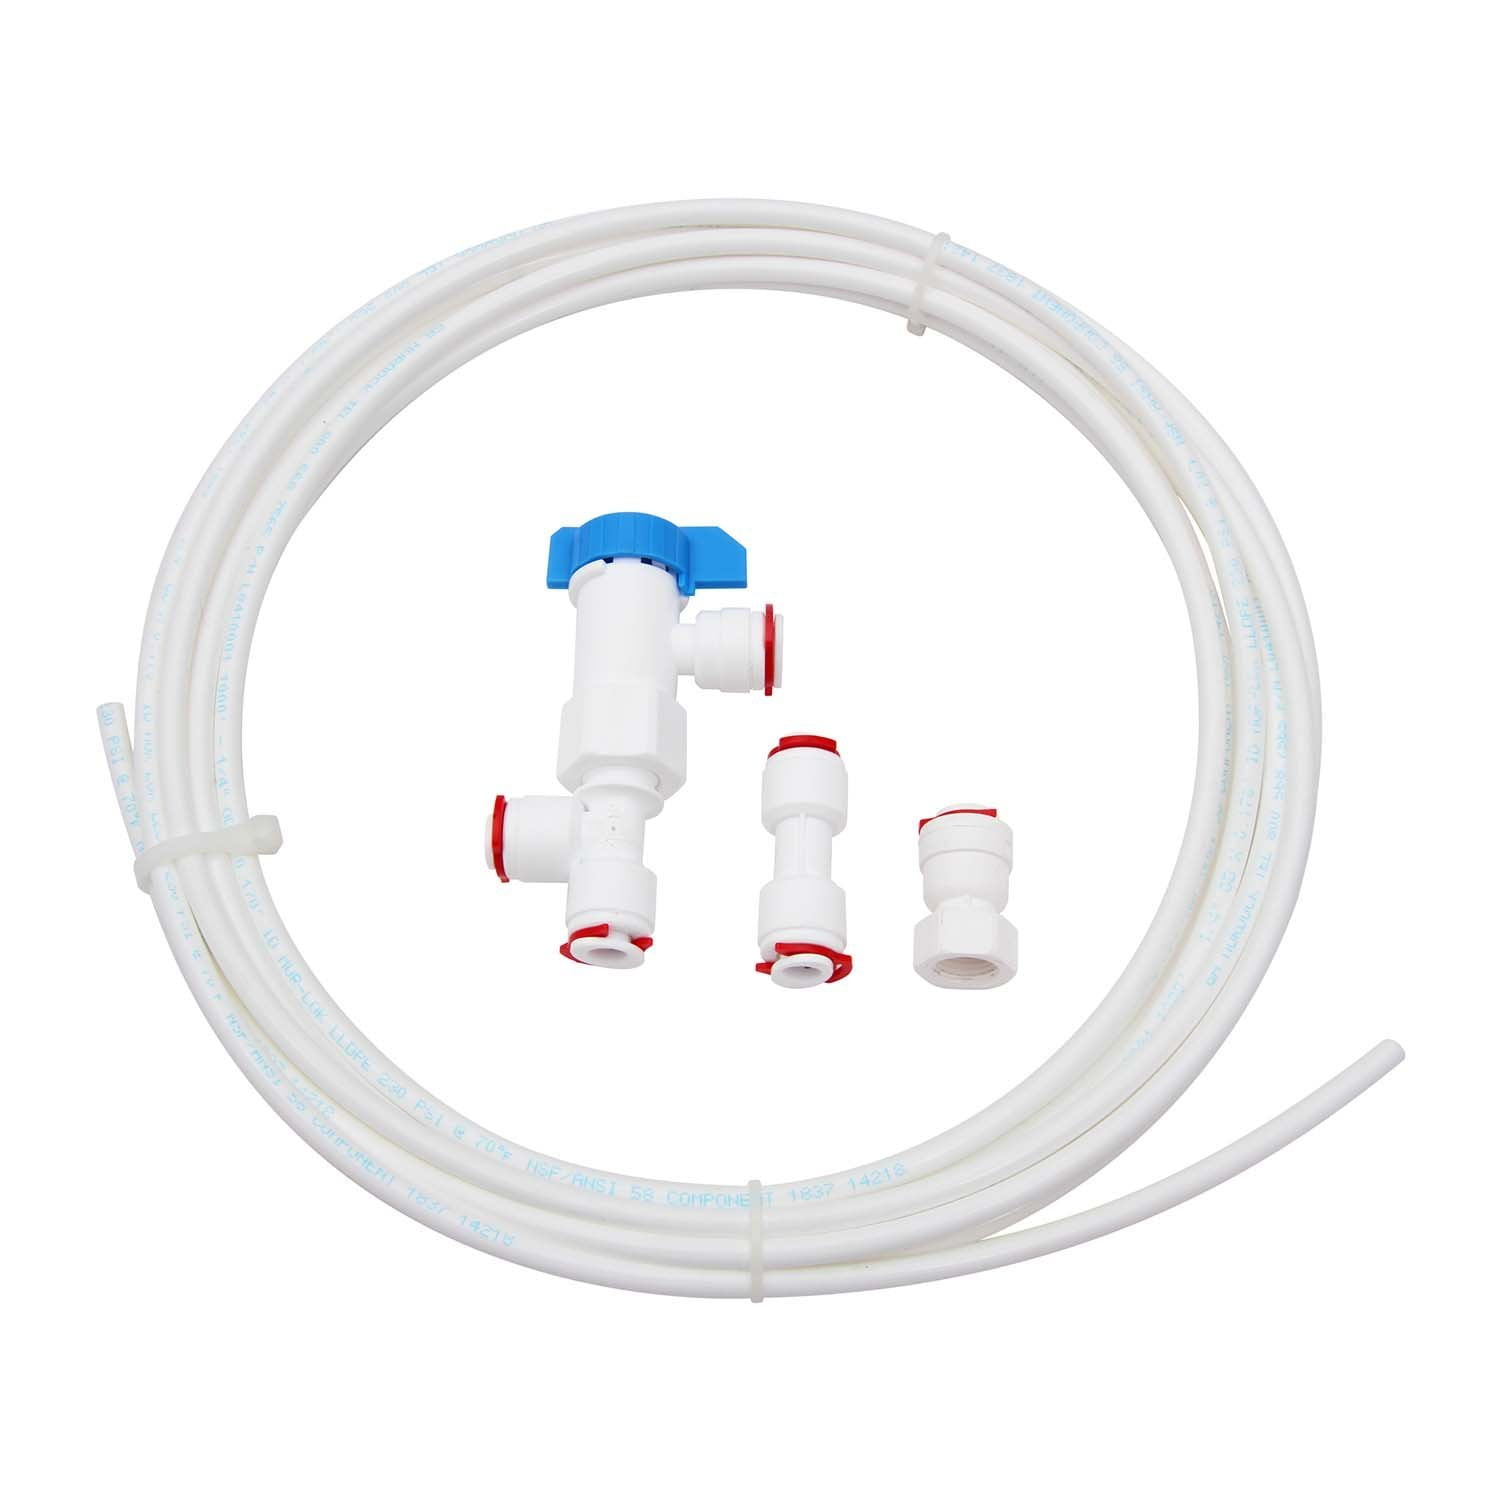 Universal Ice Maker Kit for Reverse Osmosis/ Water Filter to Refrigerator, Universal kit for